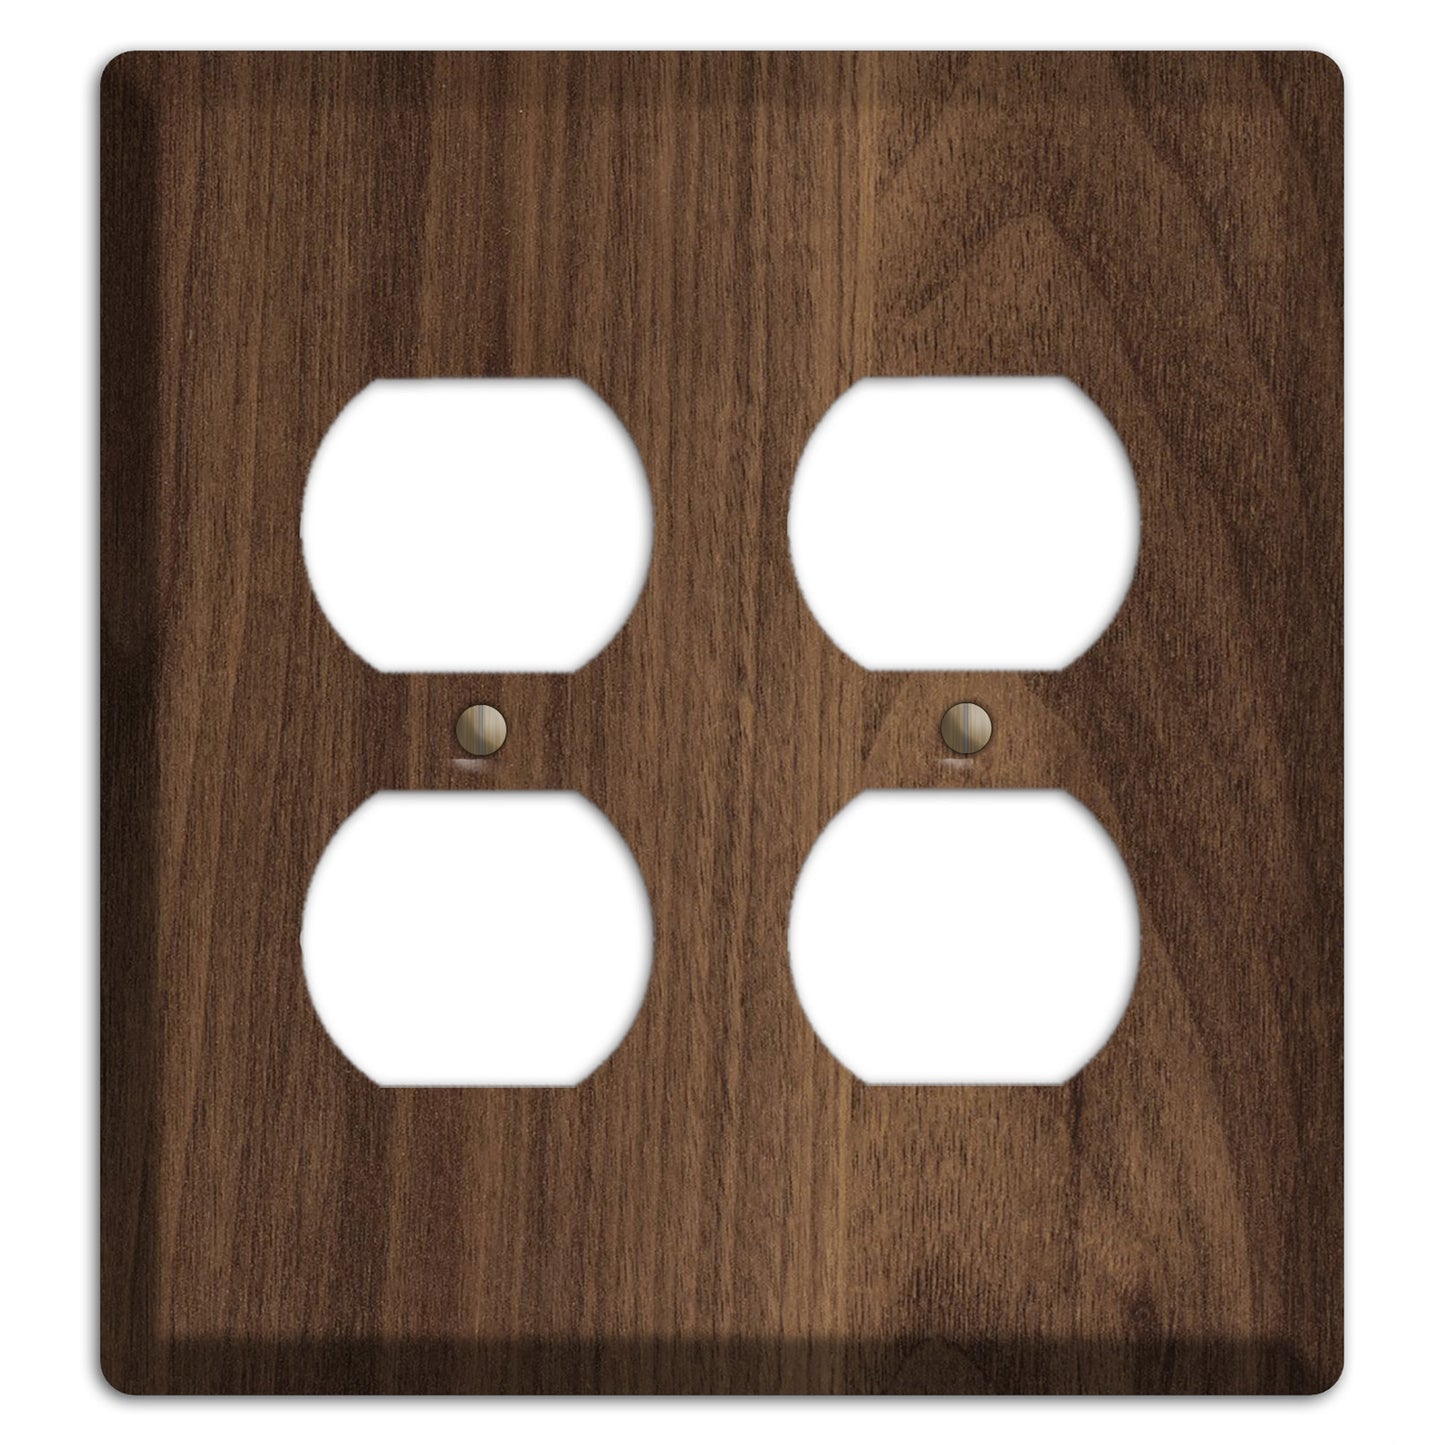 Unfinished Walnut Wood 2 Duplex Outlet Cover Plate